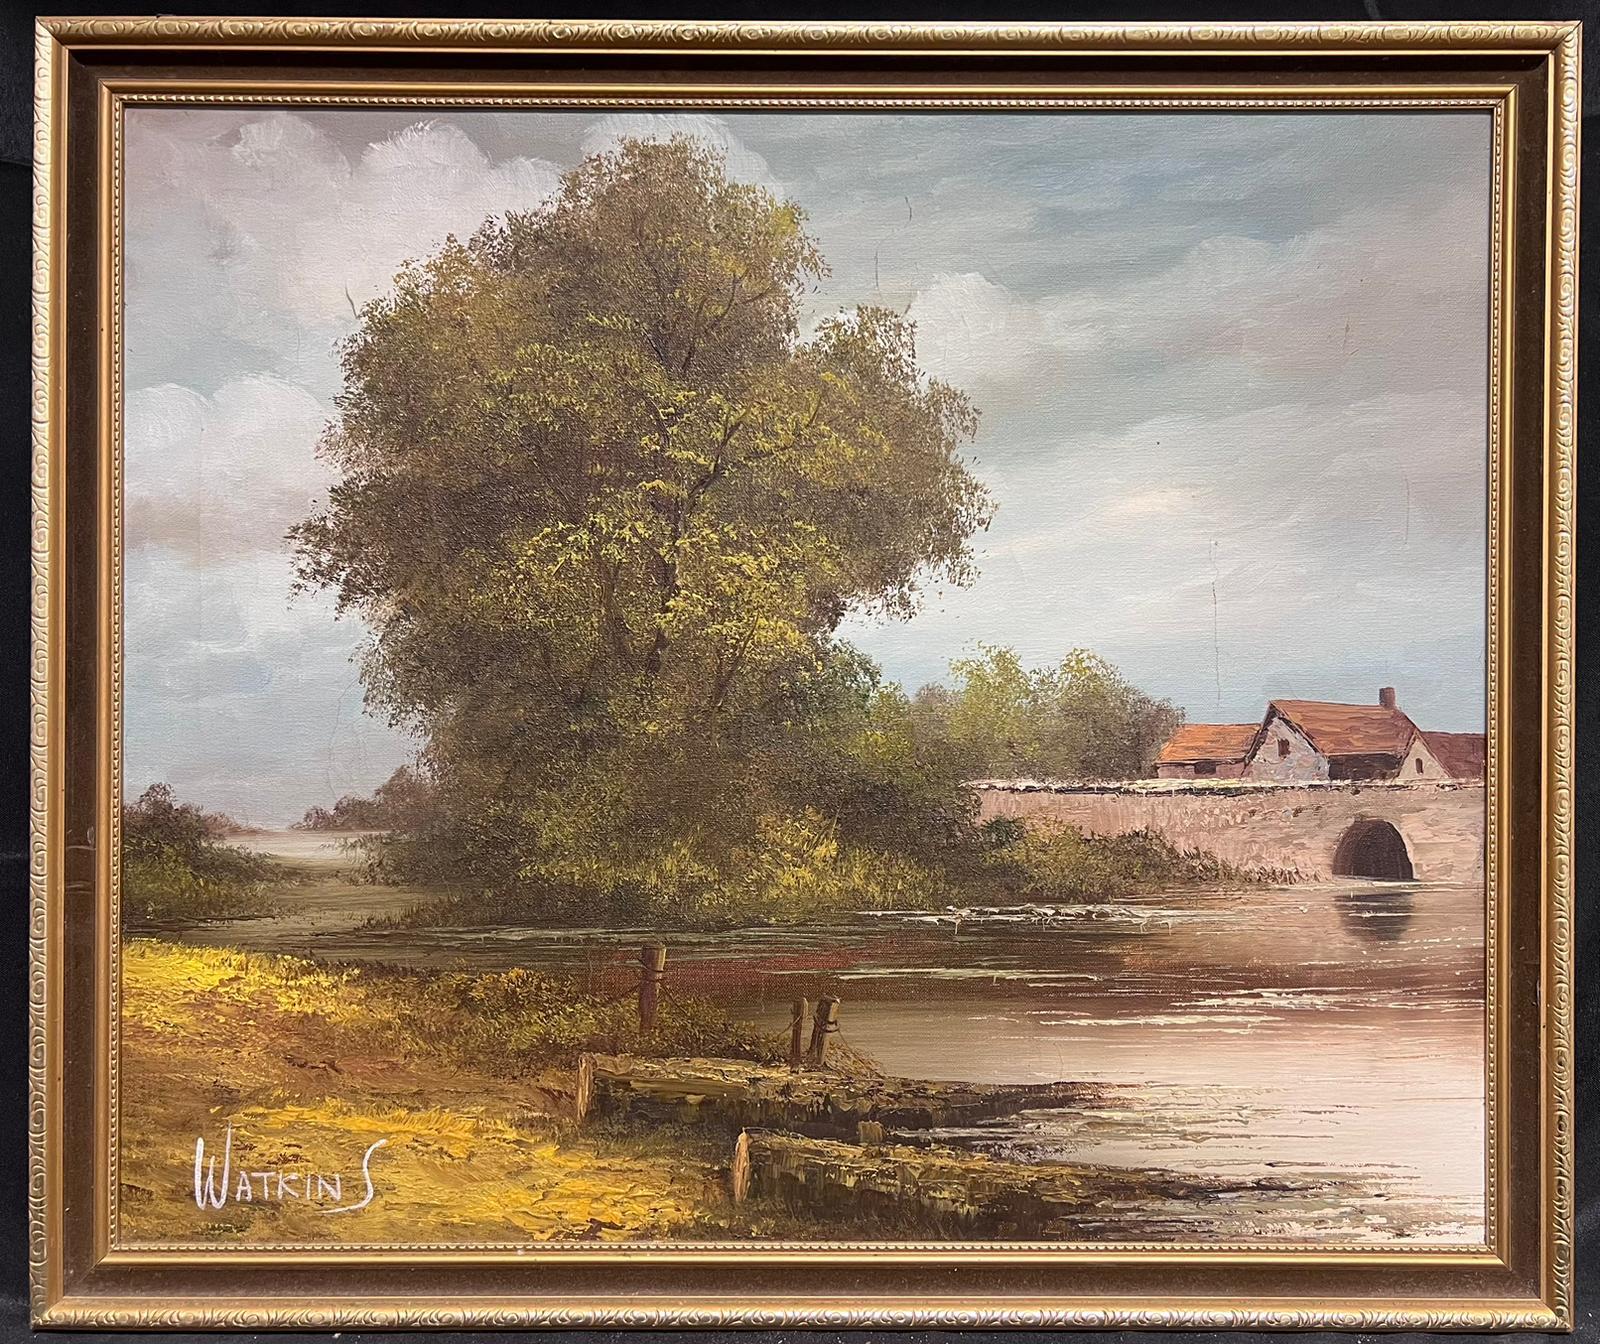 English artist Landscape Painting - Tranquil Rural English River Landscape signed oil painting on canvas